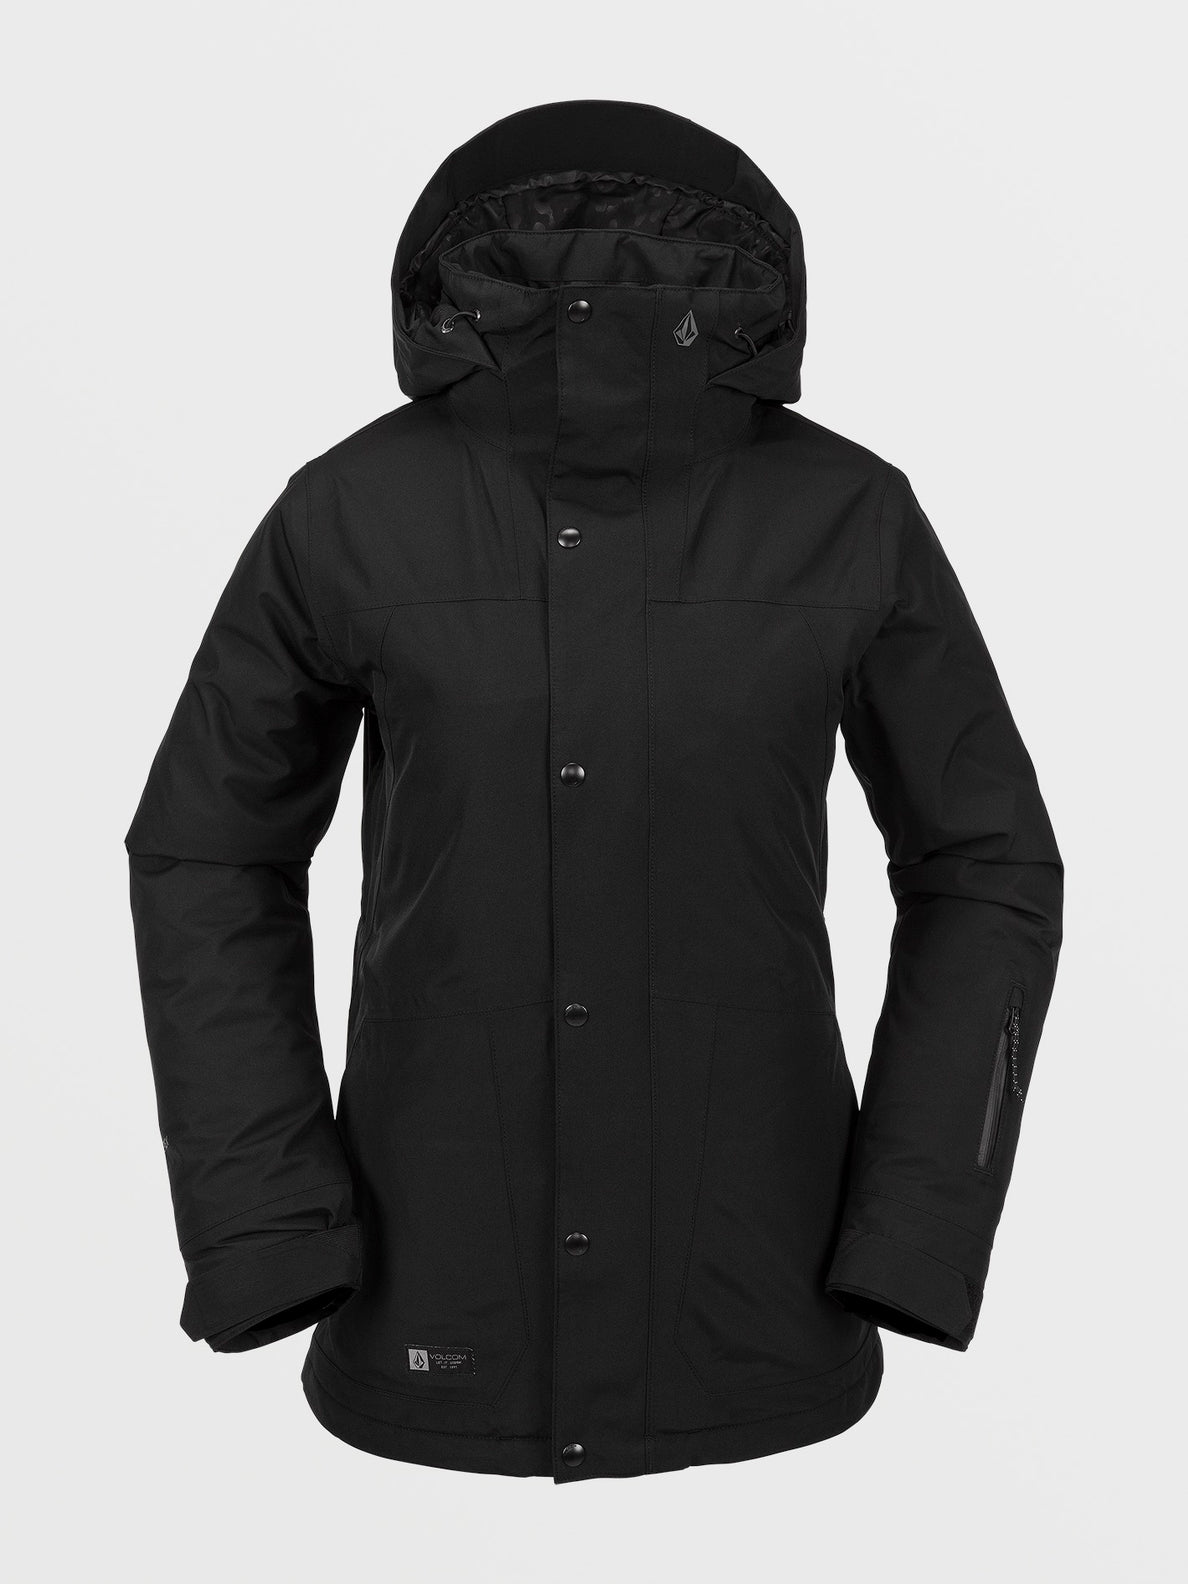 Womens Ell Insulated Gore-Tex Jacket - Black (H0452404_BLK) [F]